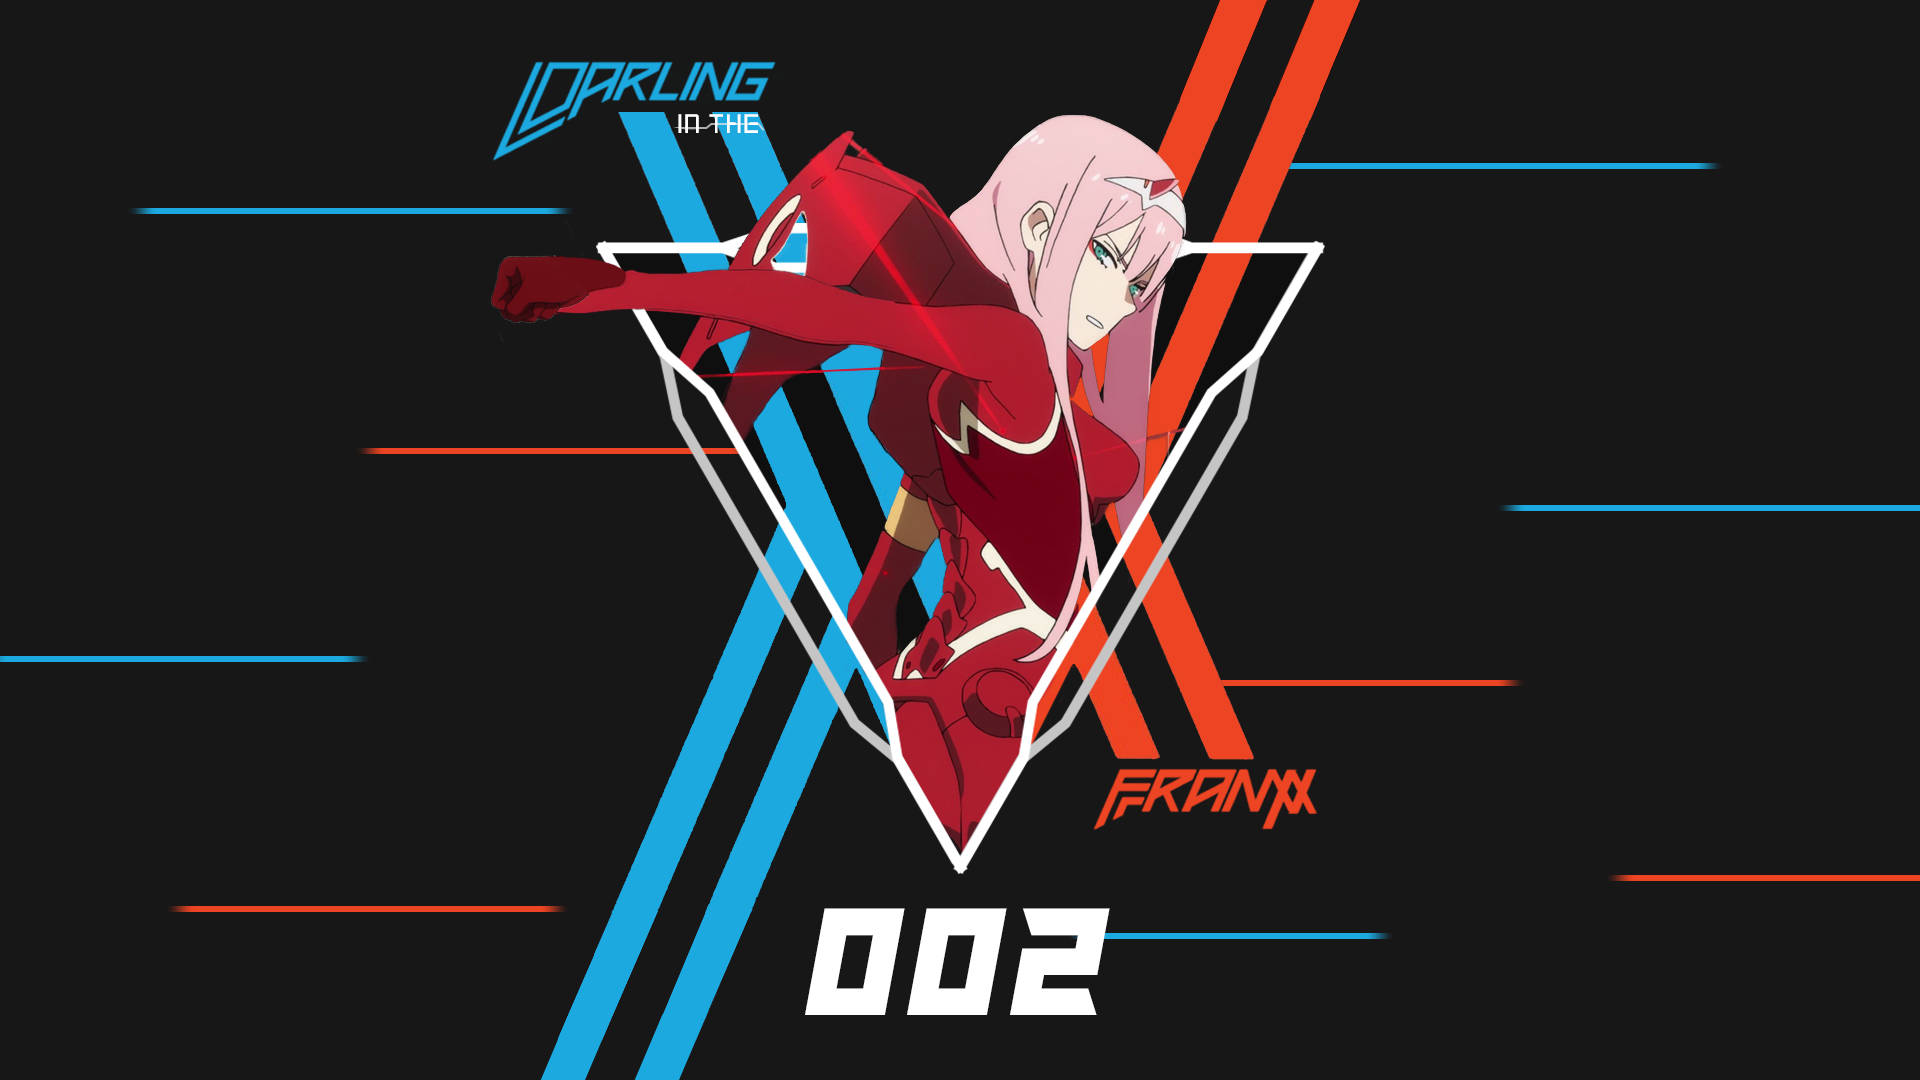 Darling In The Franxx 002 Background